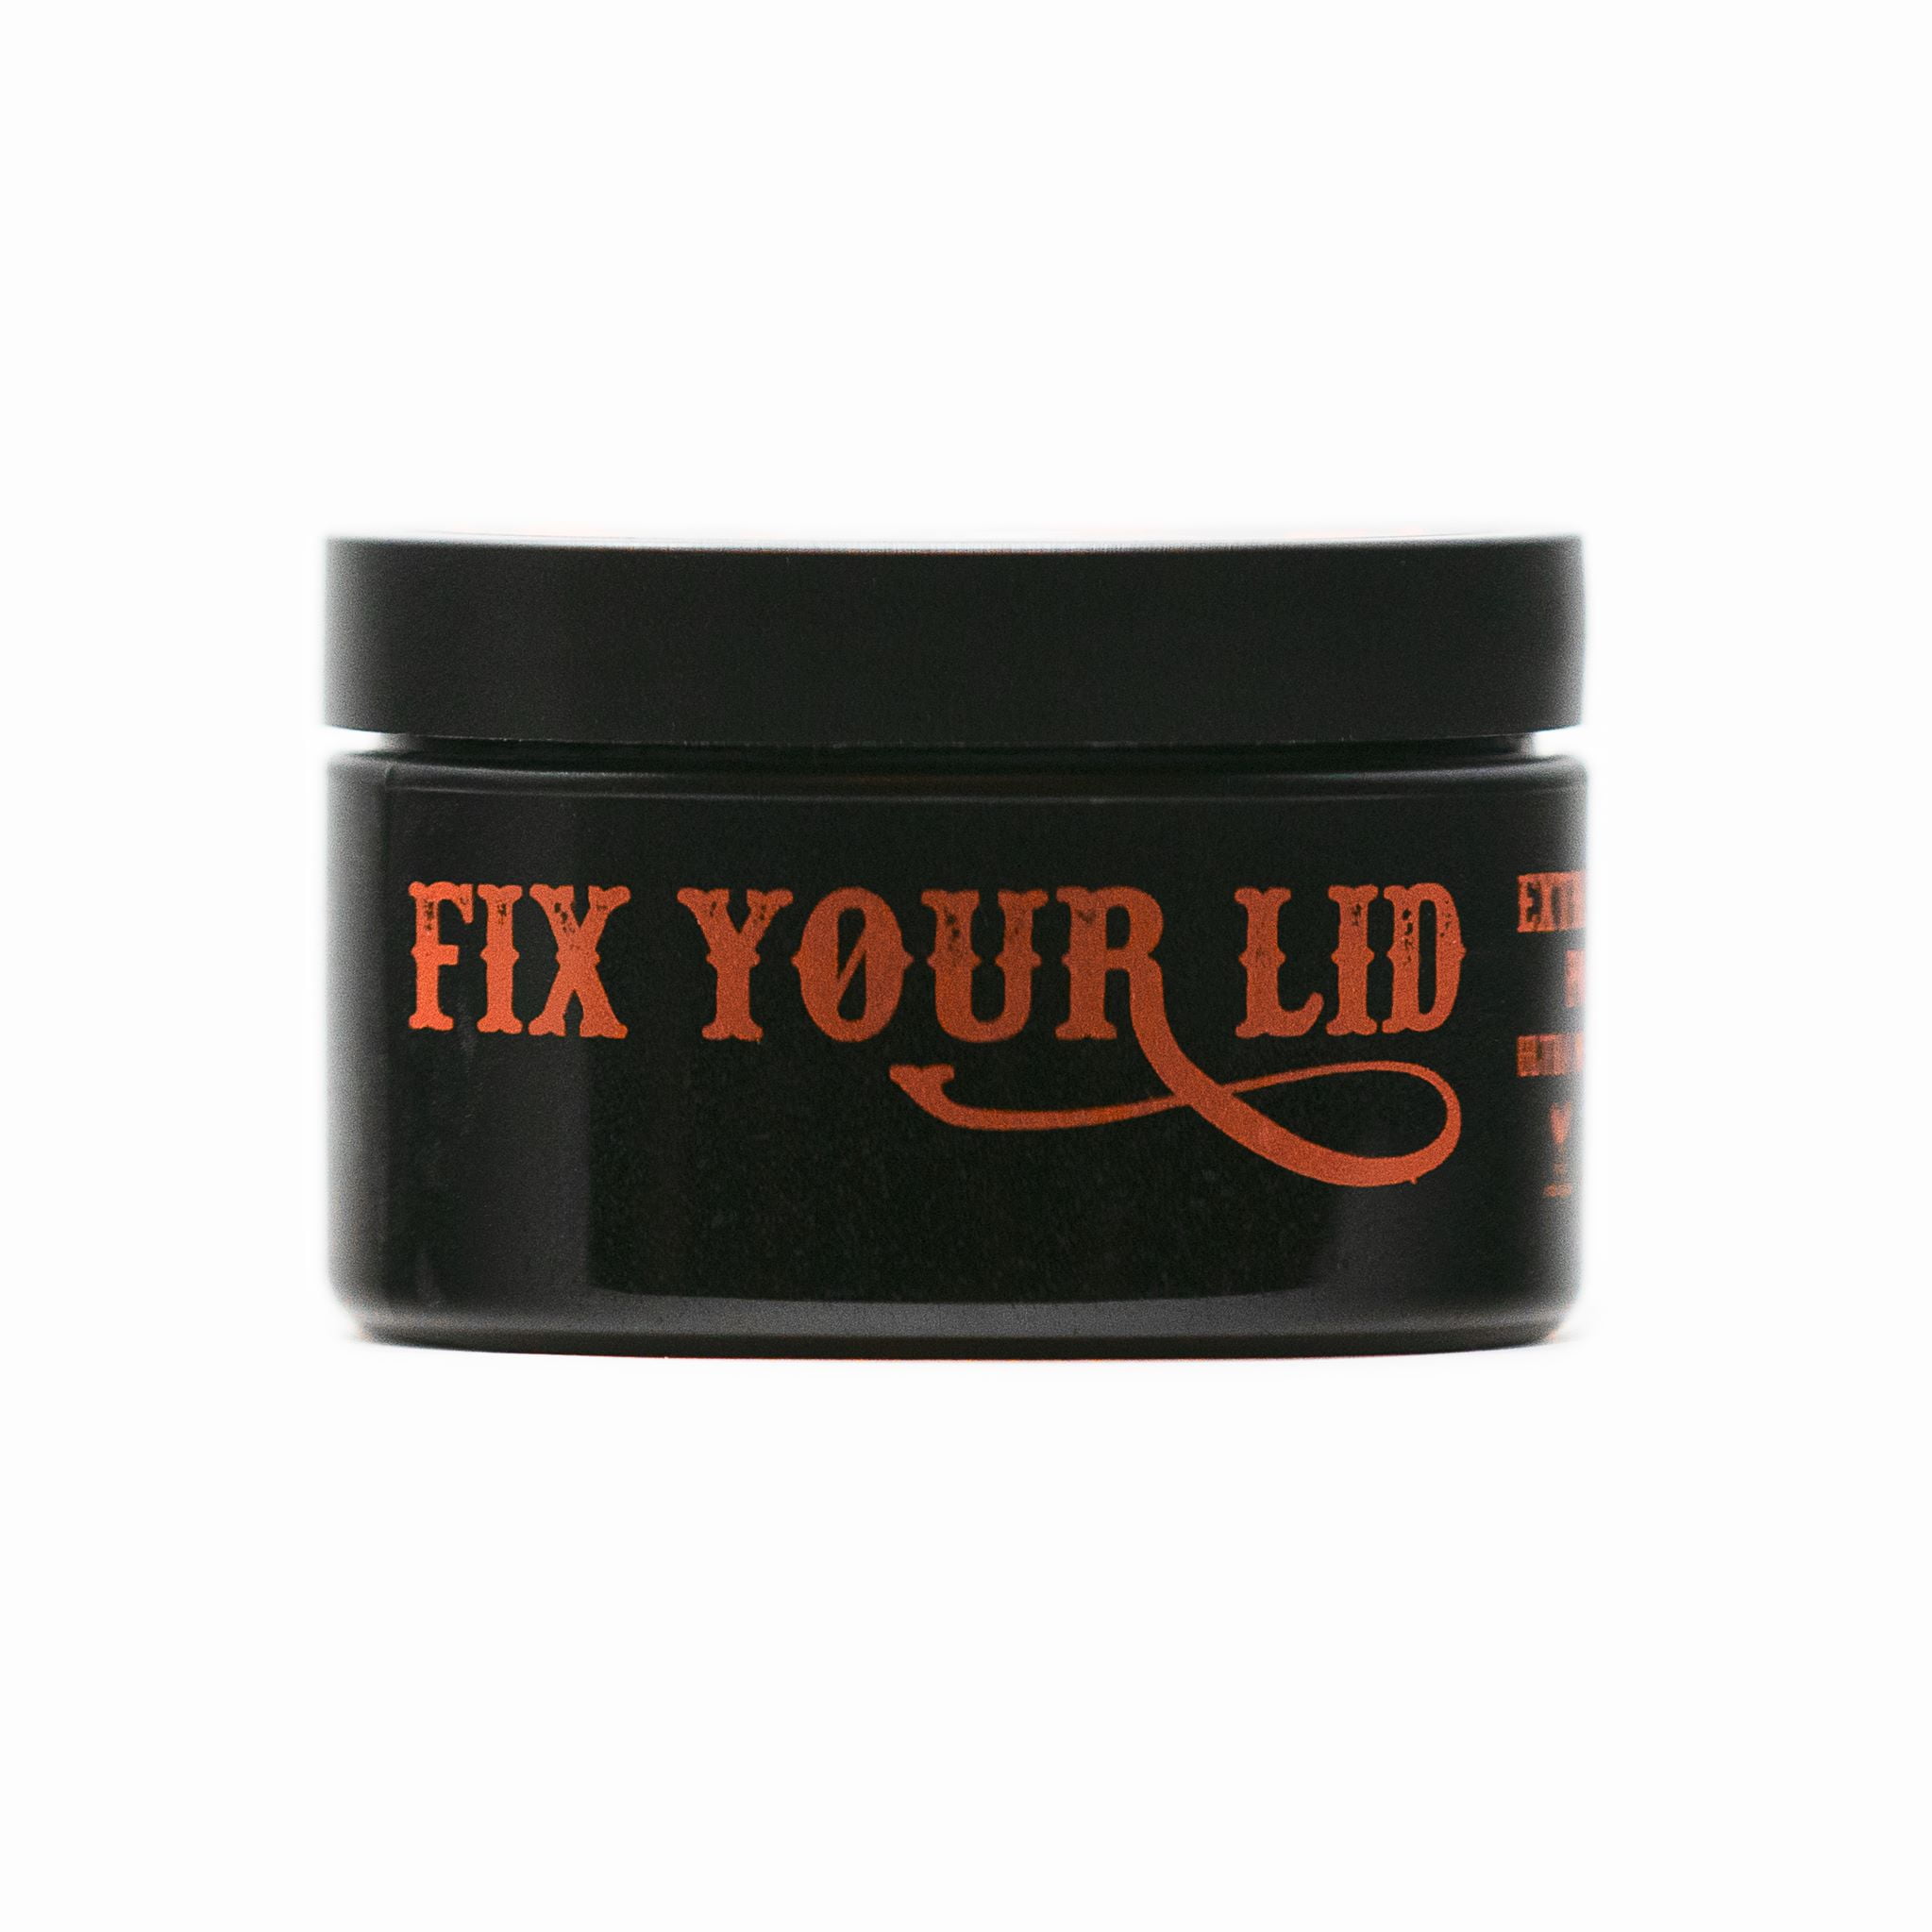 Fix Your Lid is excited to be partnering with Walmart, supporting